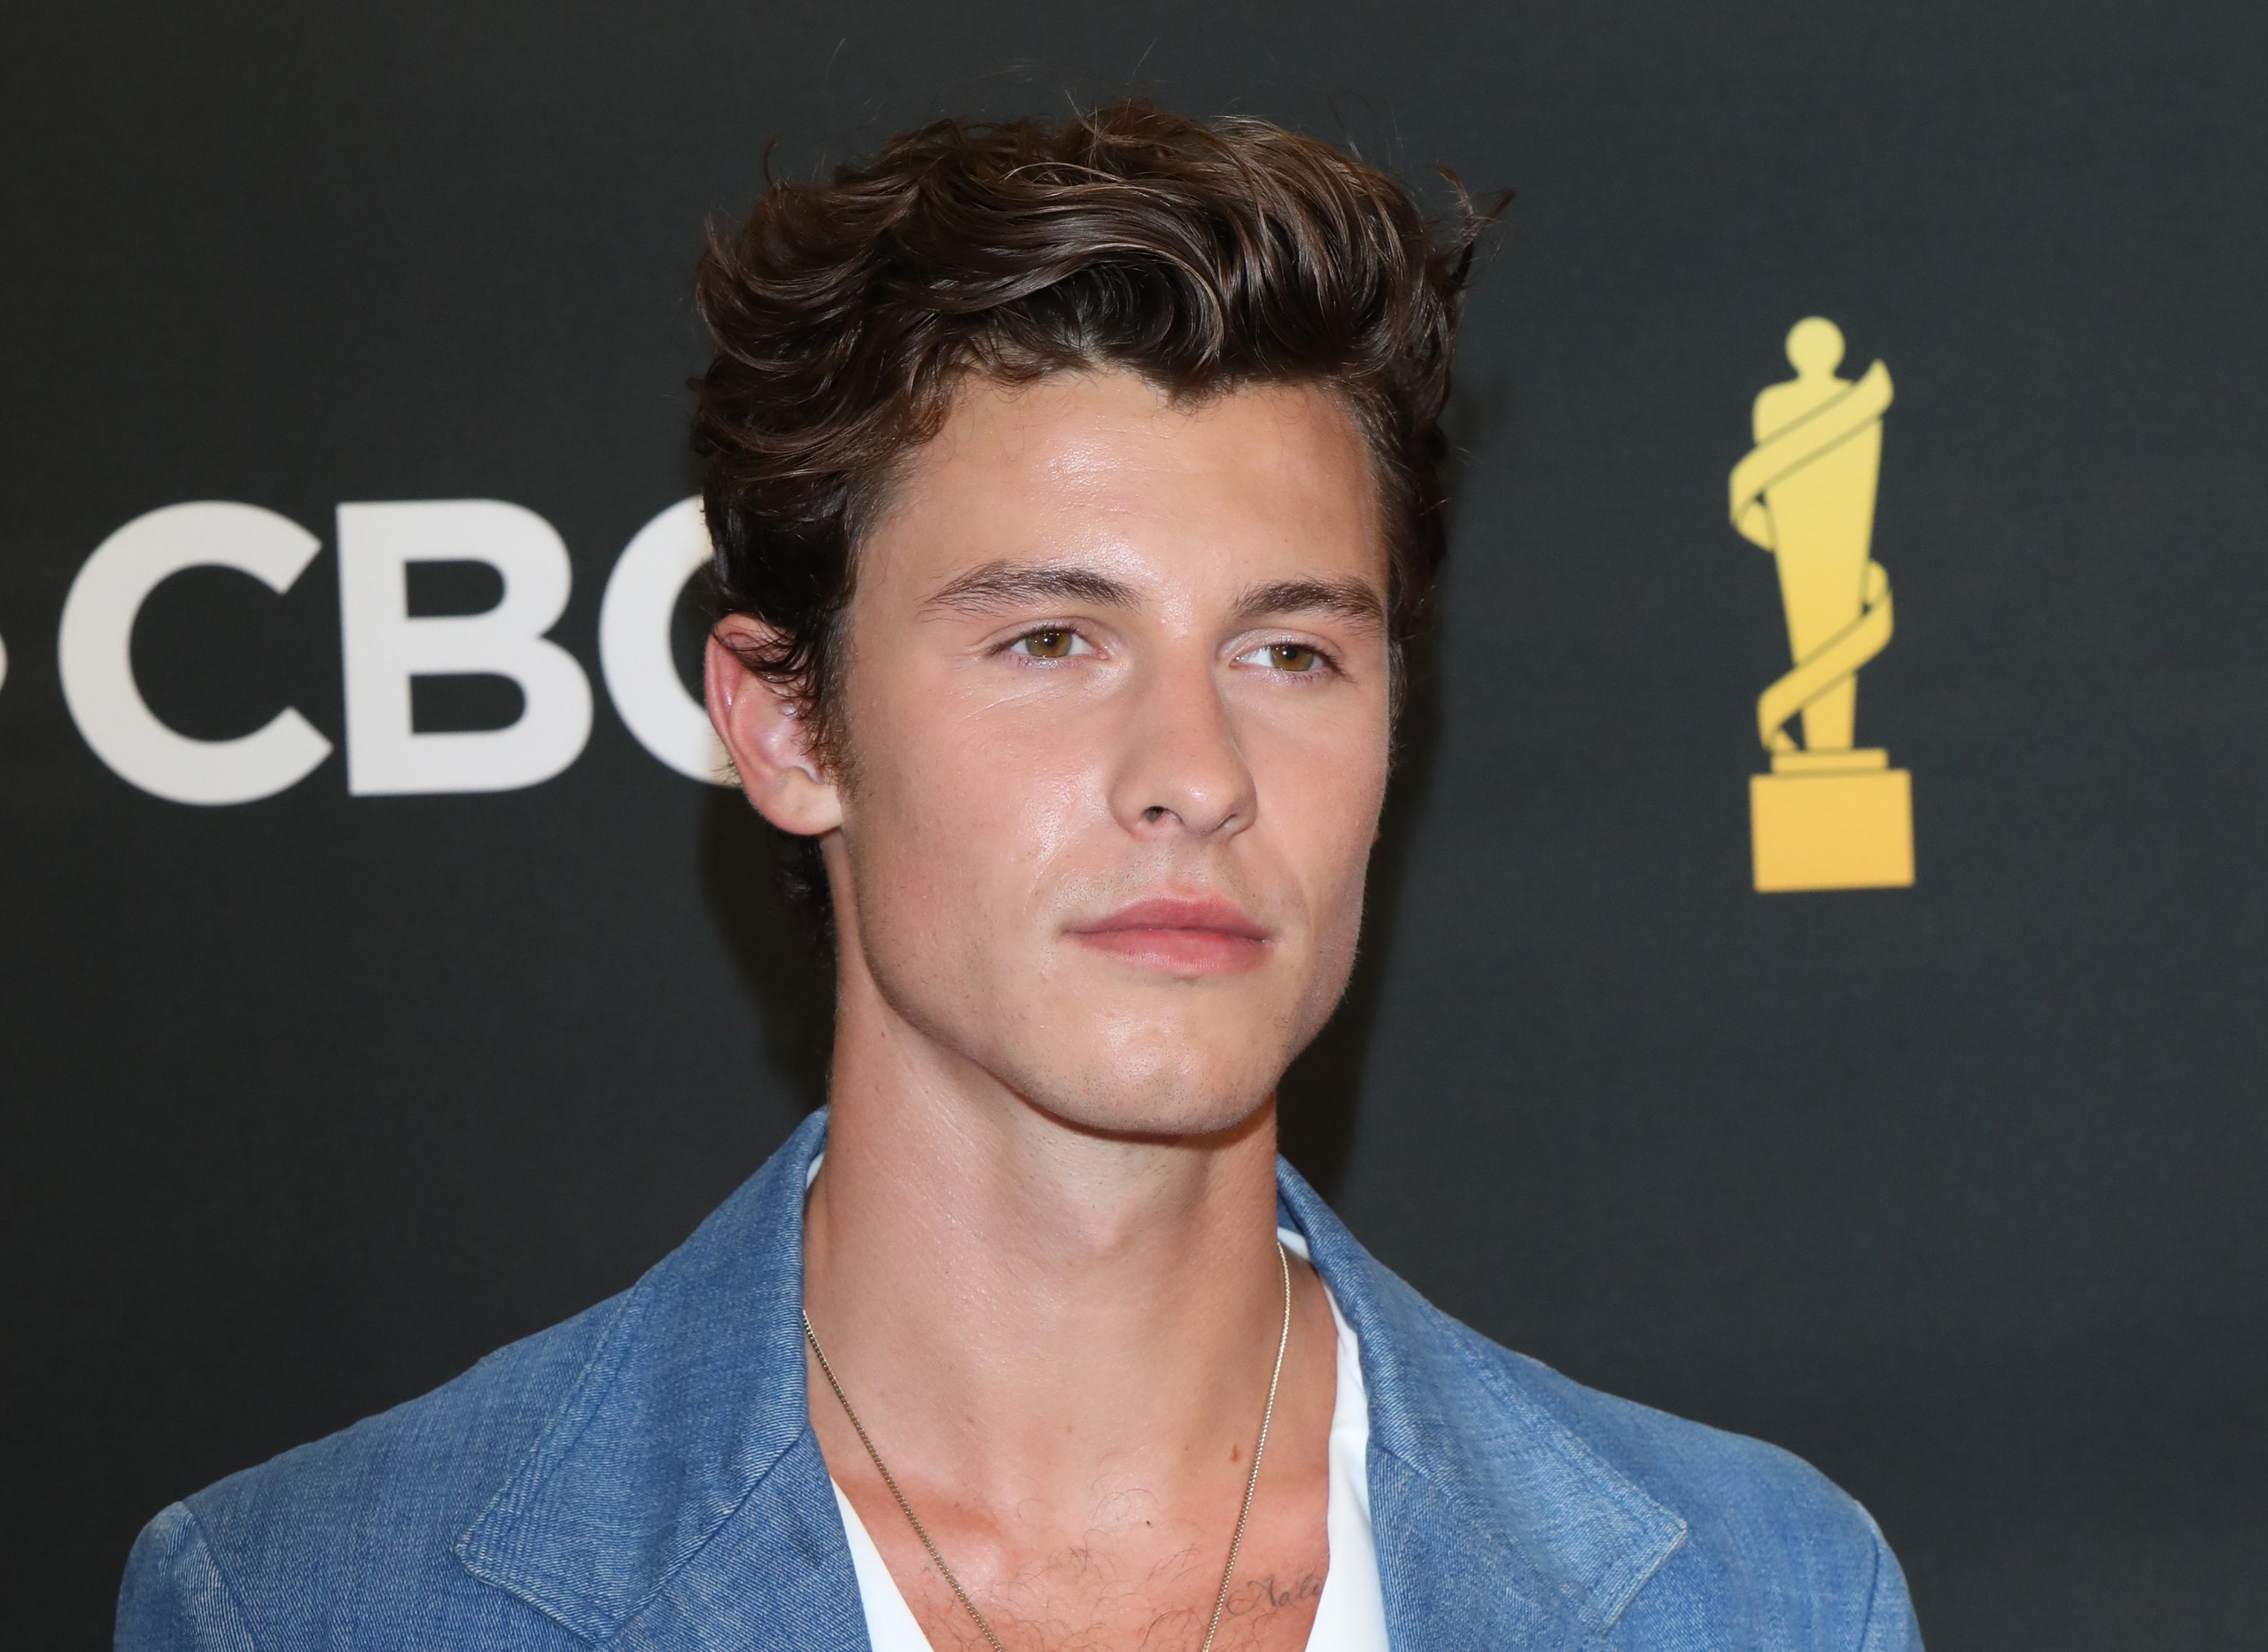 How Much is Shawn Mendes’ Net Worth as of 2023?